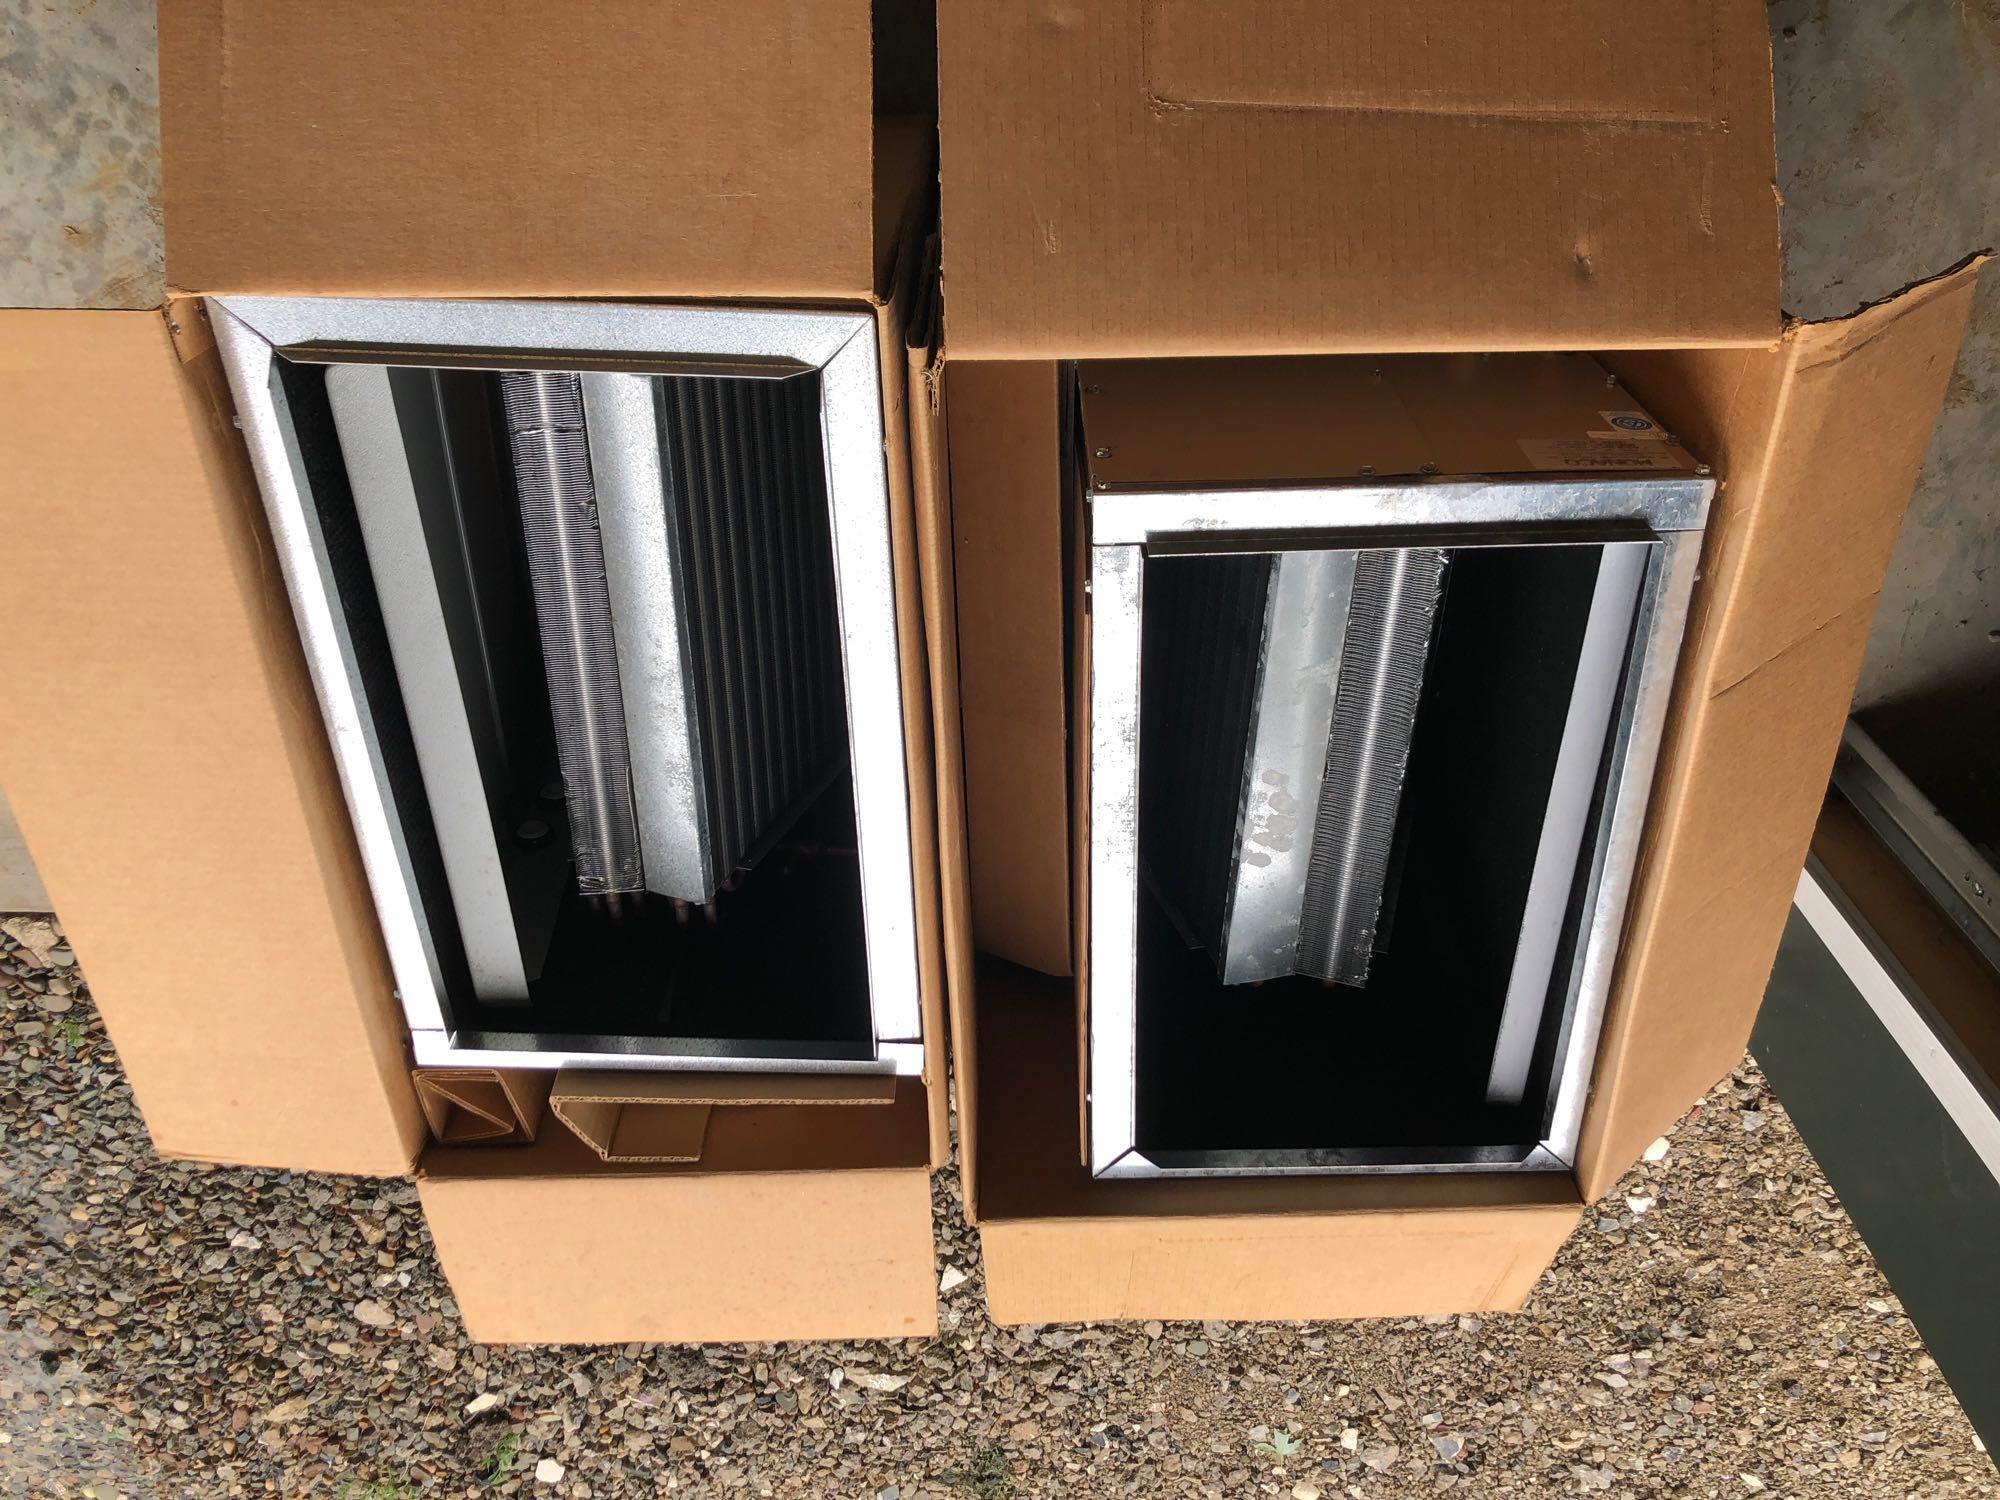 Central Air Conditioners with condensers